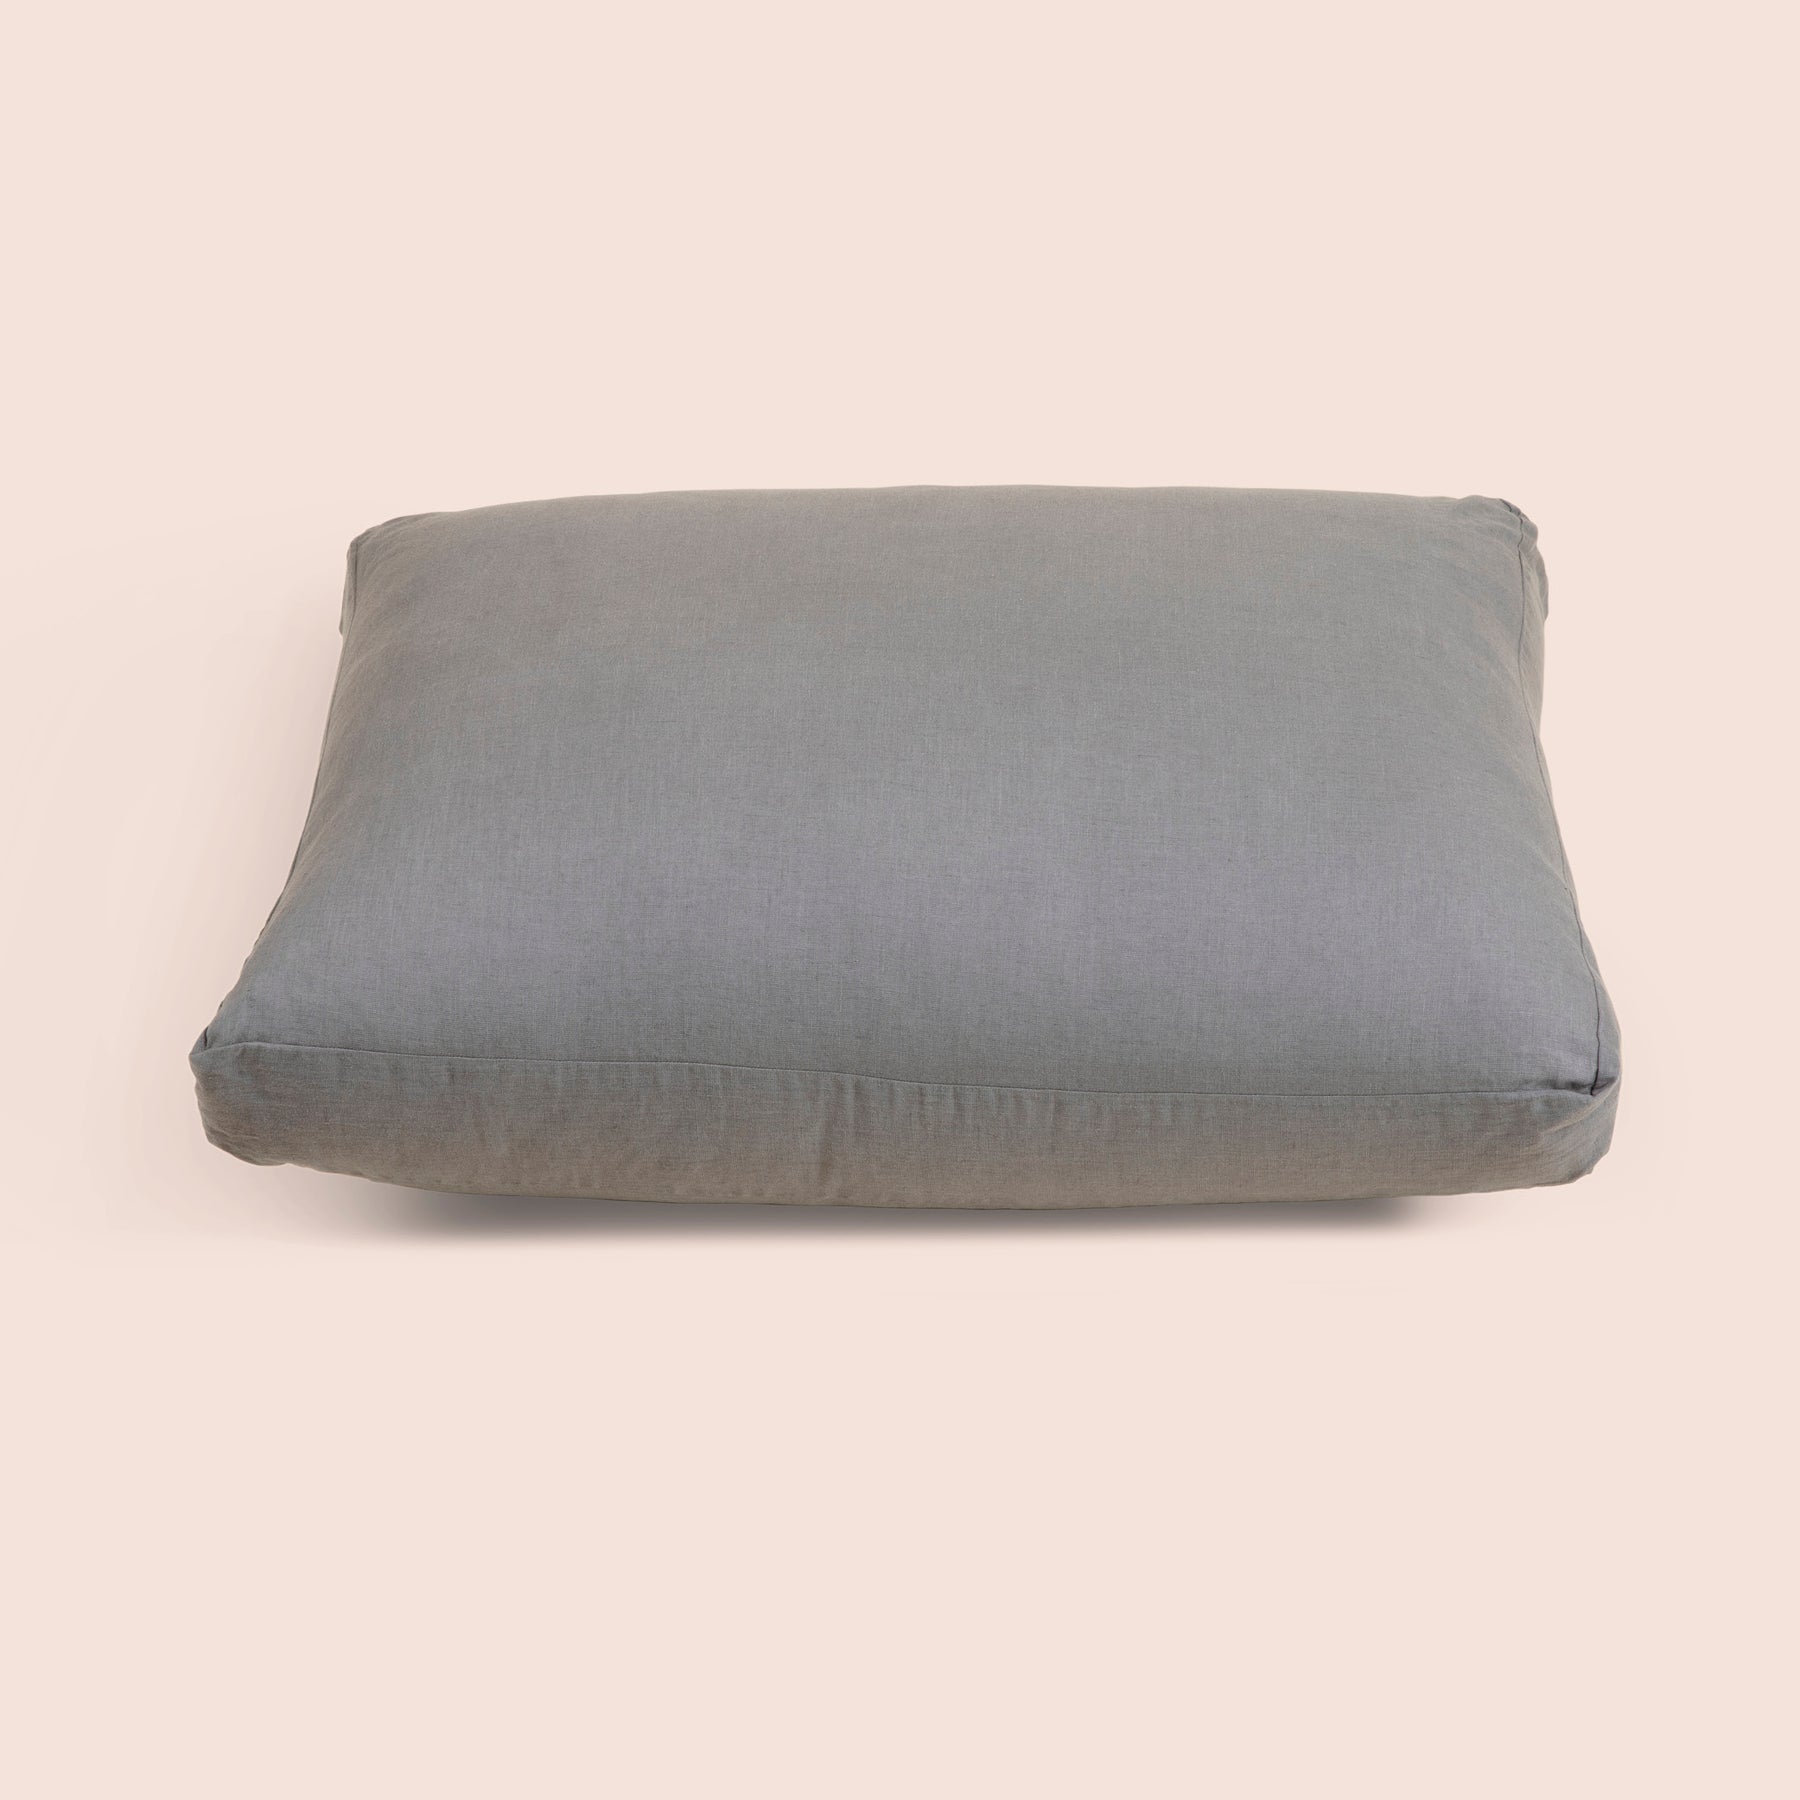 Image of Stone Gray Blended Linen Meditation Cushion Cover on a meditation cushion with a light pink background